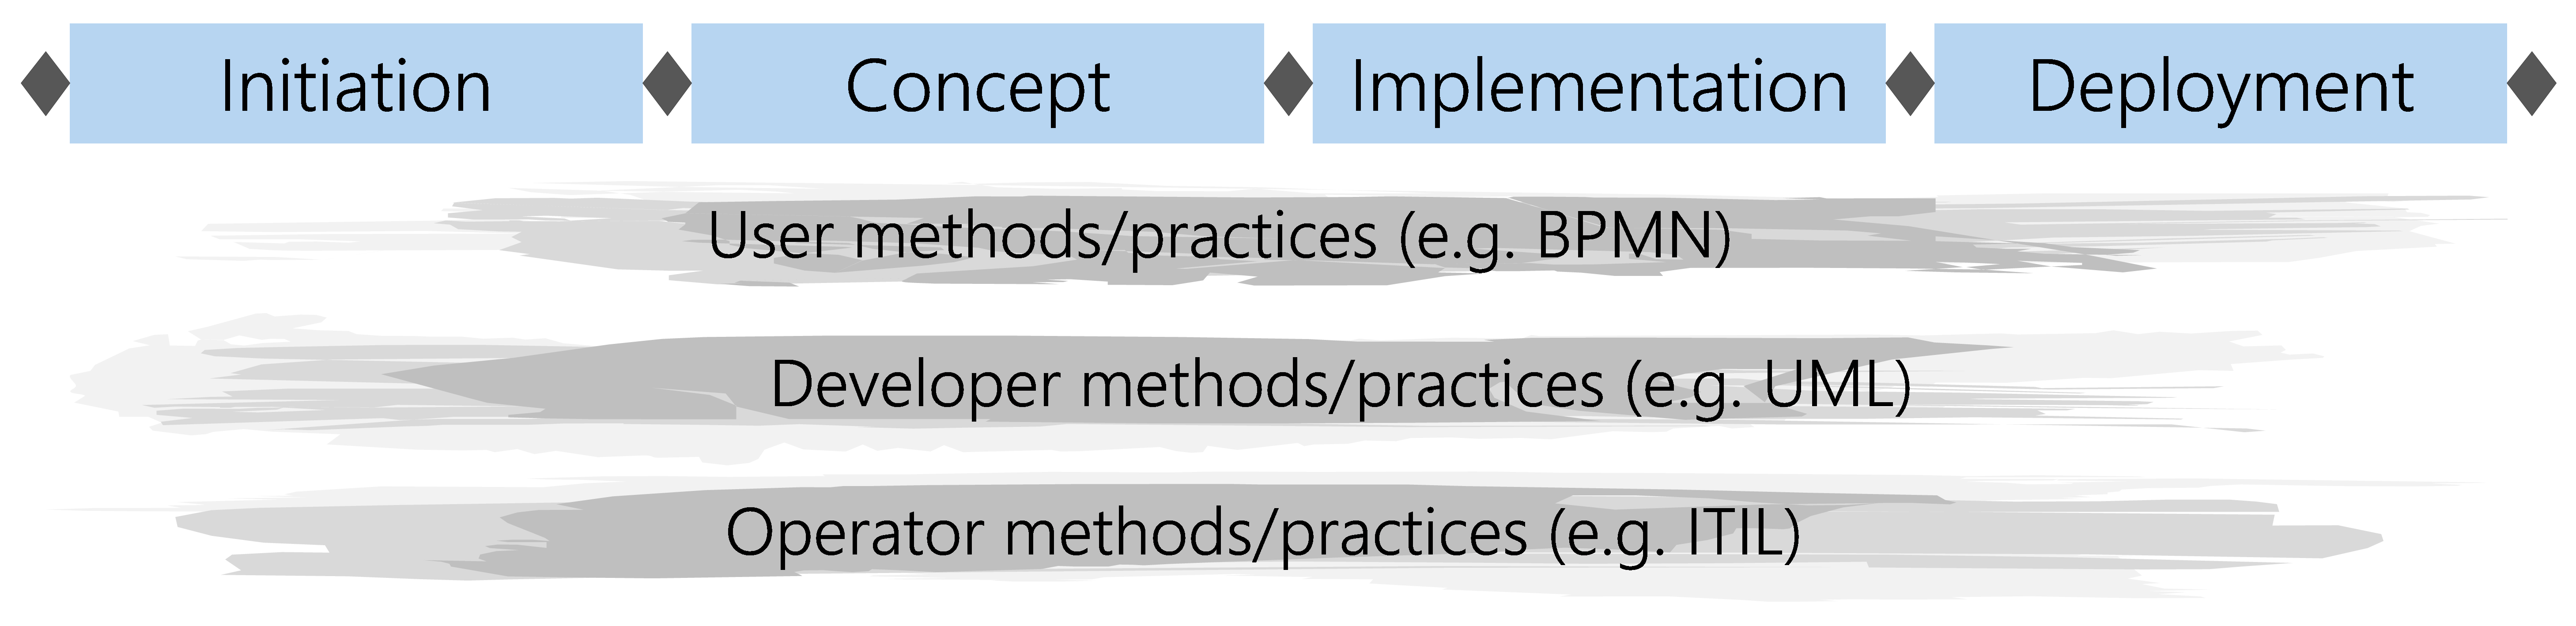 Figure 32: Use of supplementary methods and practices